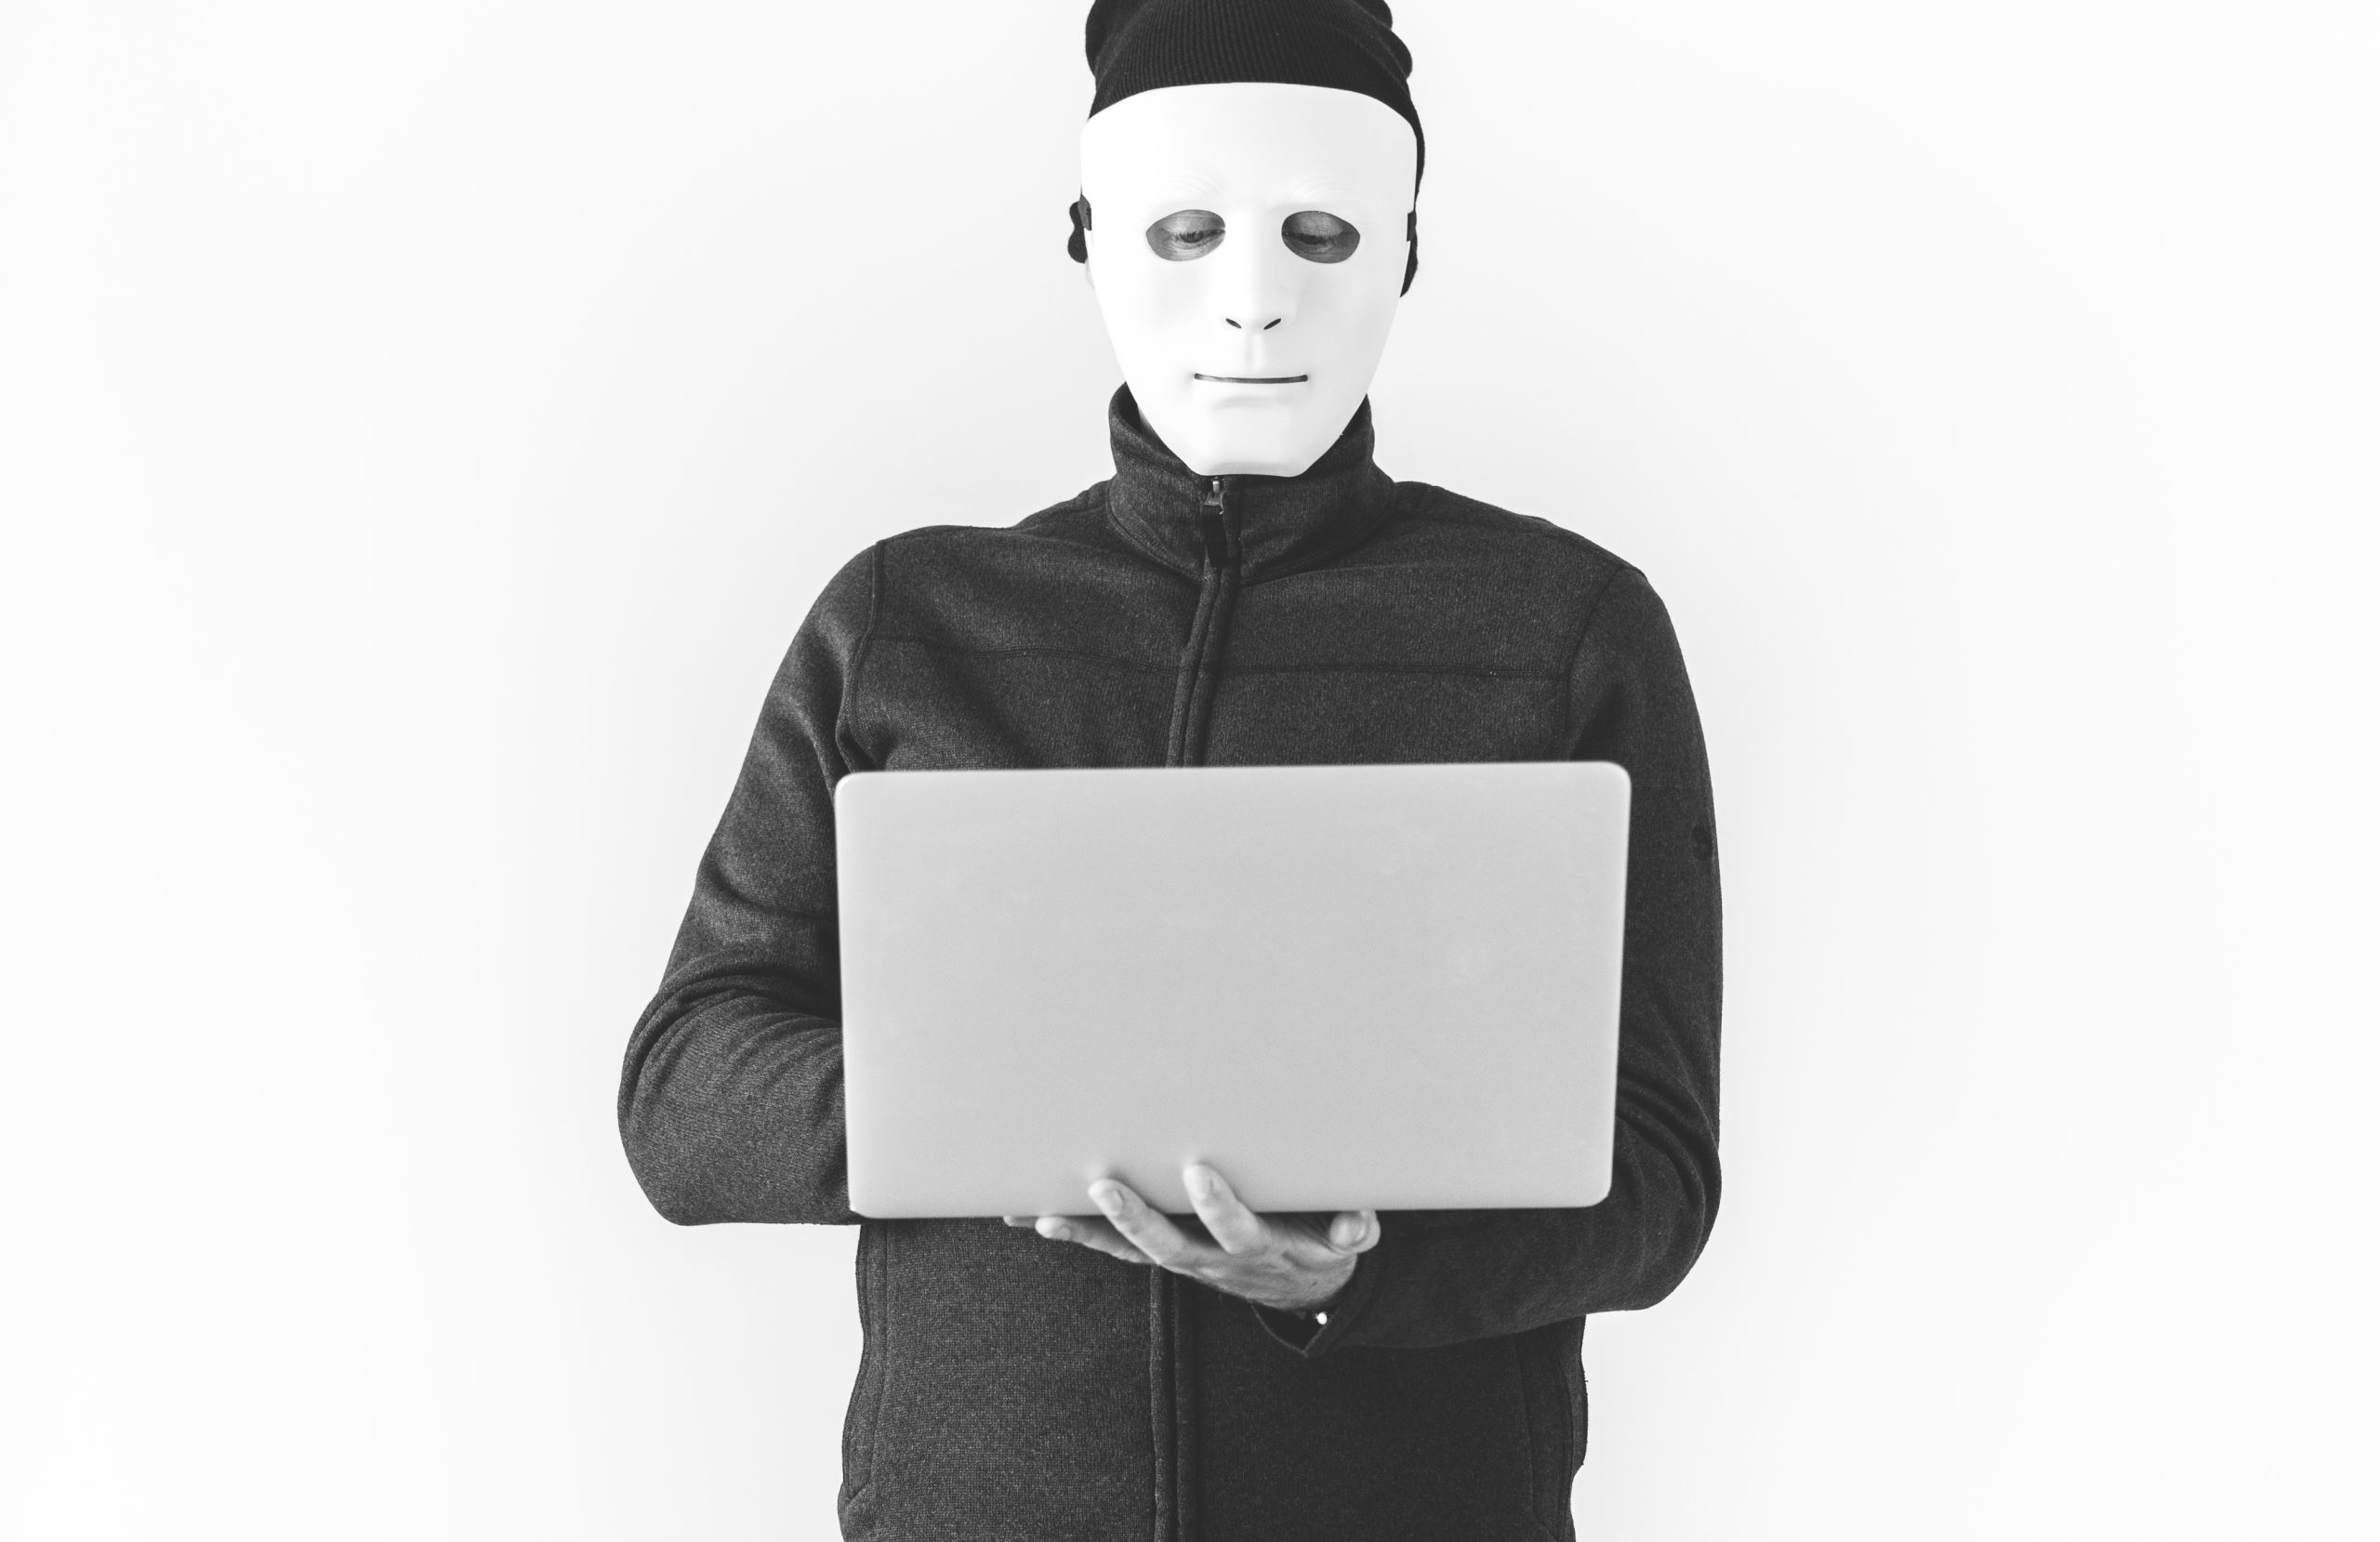 What to Do When Your Client is Hacked